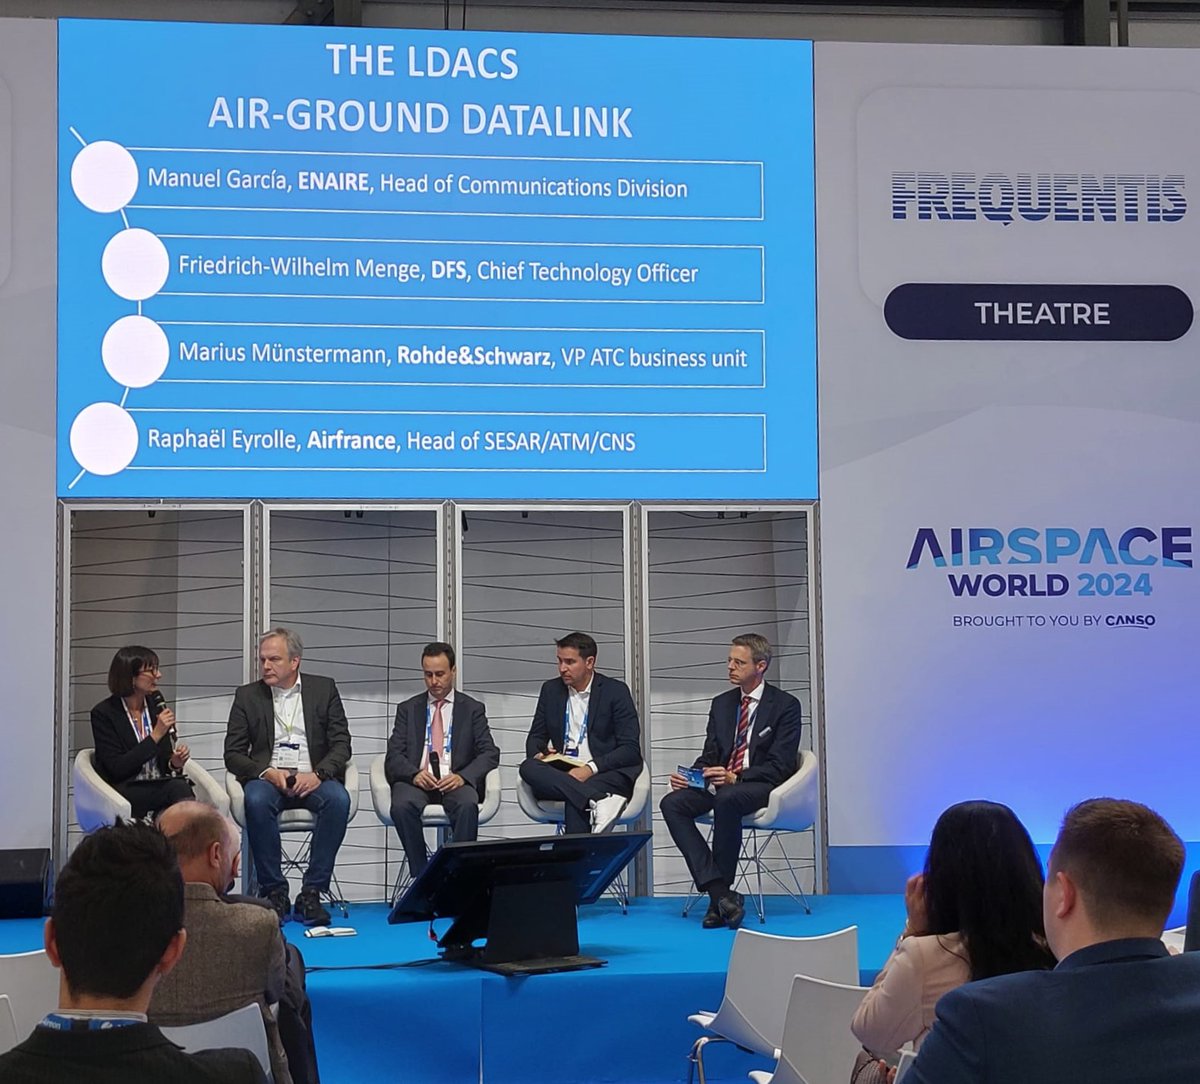 This week at @AirspaceWorld, Simona Pierattelli, #FCDI Project Coordinator, chaired the panel “How LDACS can drive the digital transformation of ATM”, highlighting the benefits of the L-band Digital Aeronautical Communications System technology, one of the project’s key solutions